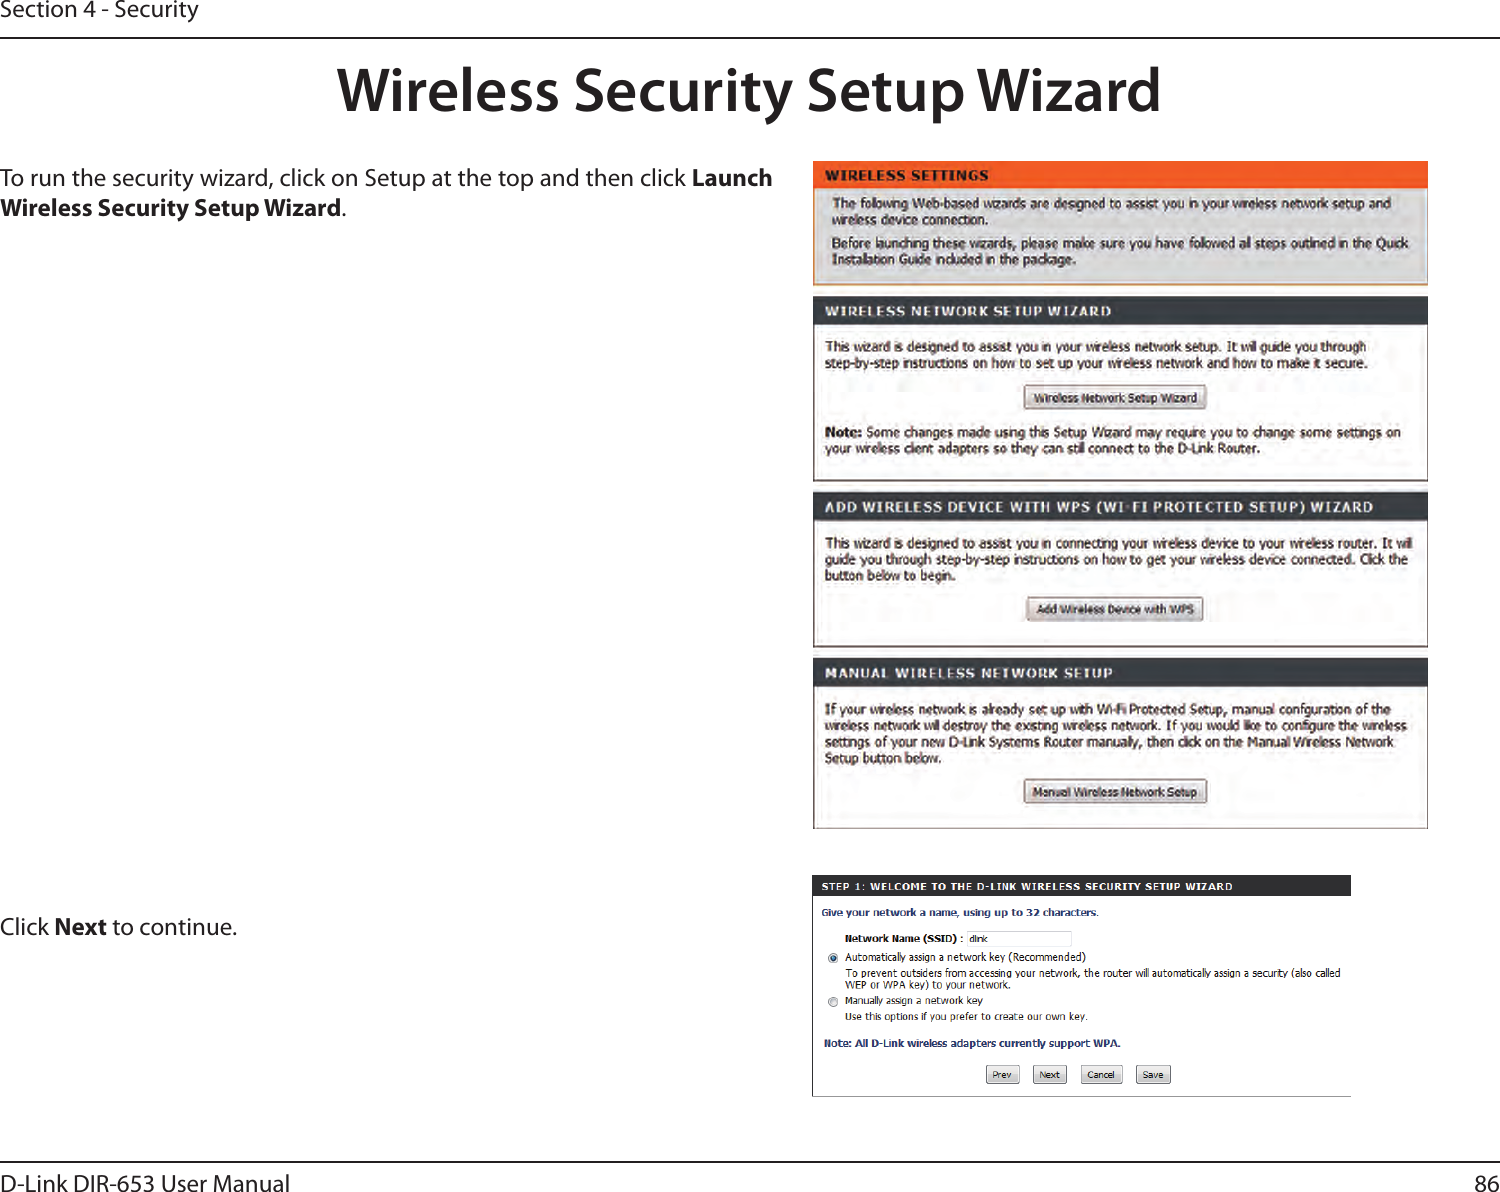 86D-Link DIR-653 User ManualSection 4 - SecurityWireless Security Setup WizardTo run the security wizard, click on Setup at the top and then click Launch Wireless Security Setup Wizard.Click Next to continue.